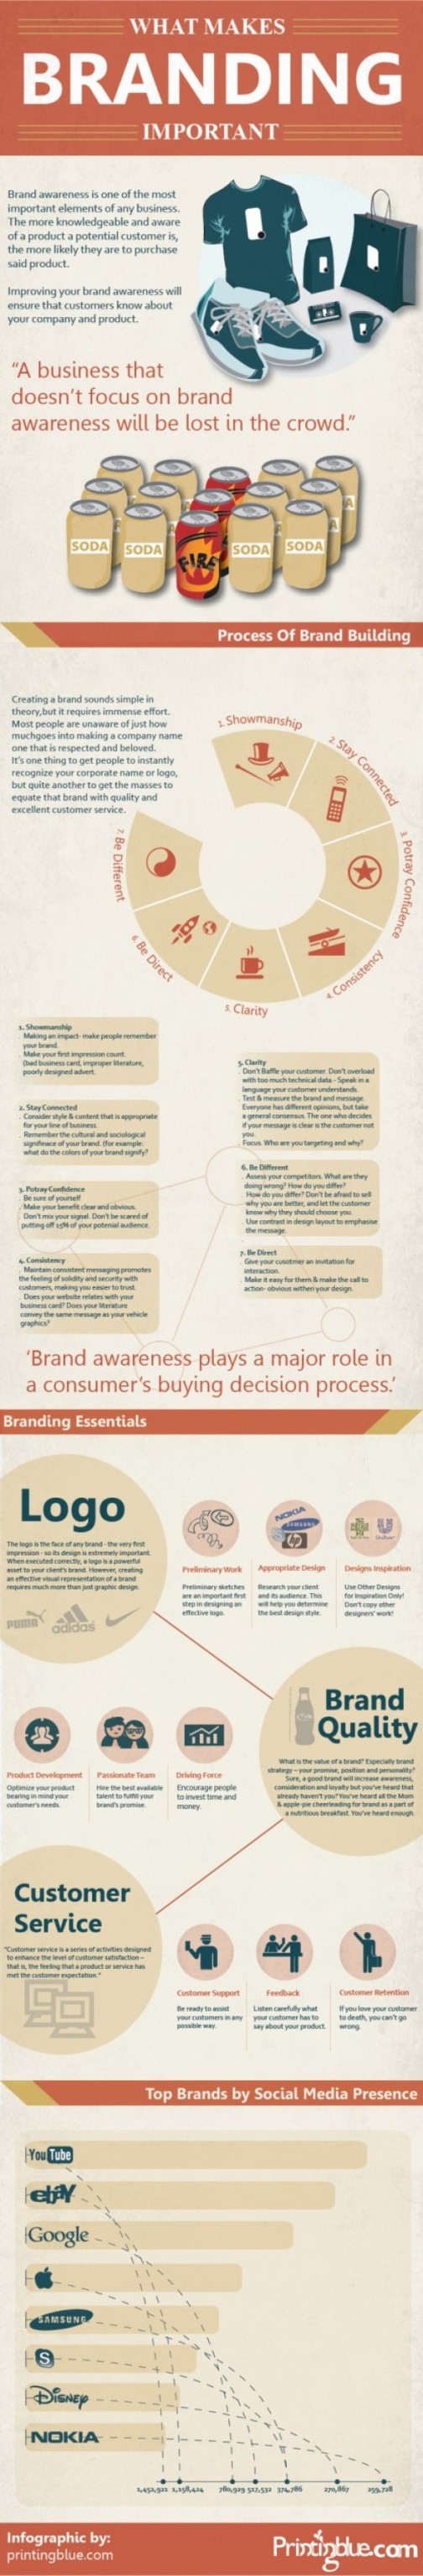 Digital Matters Blog — What Makes Branding Important [INFOGRAPHIC]